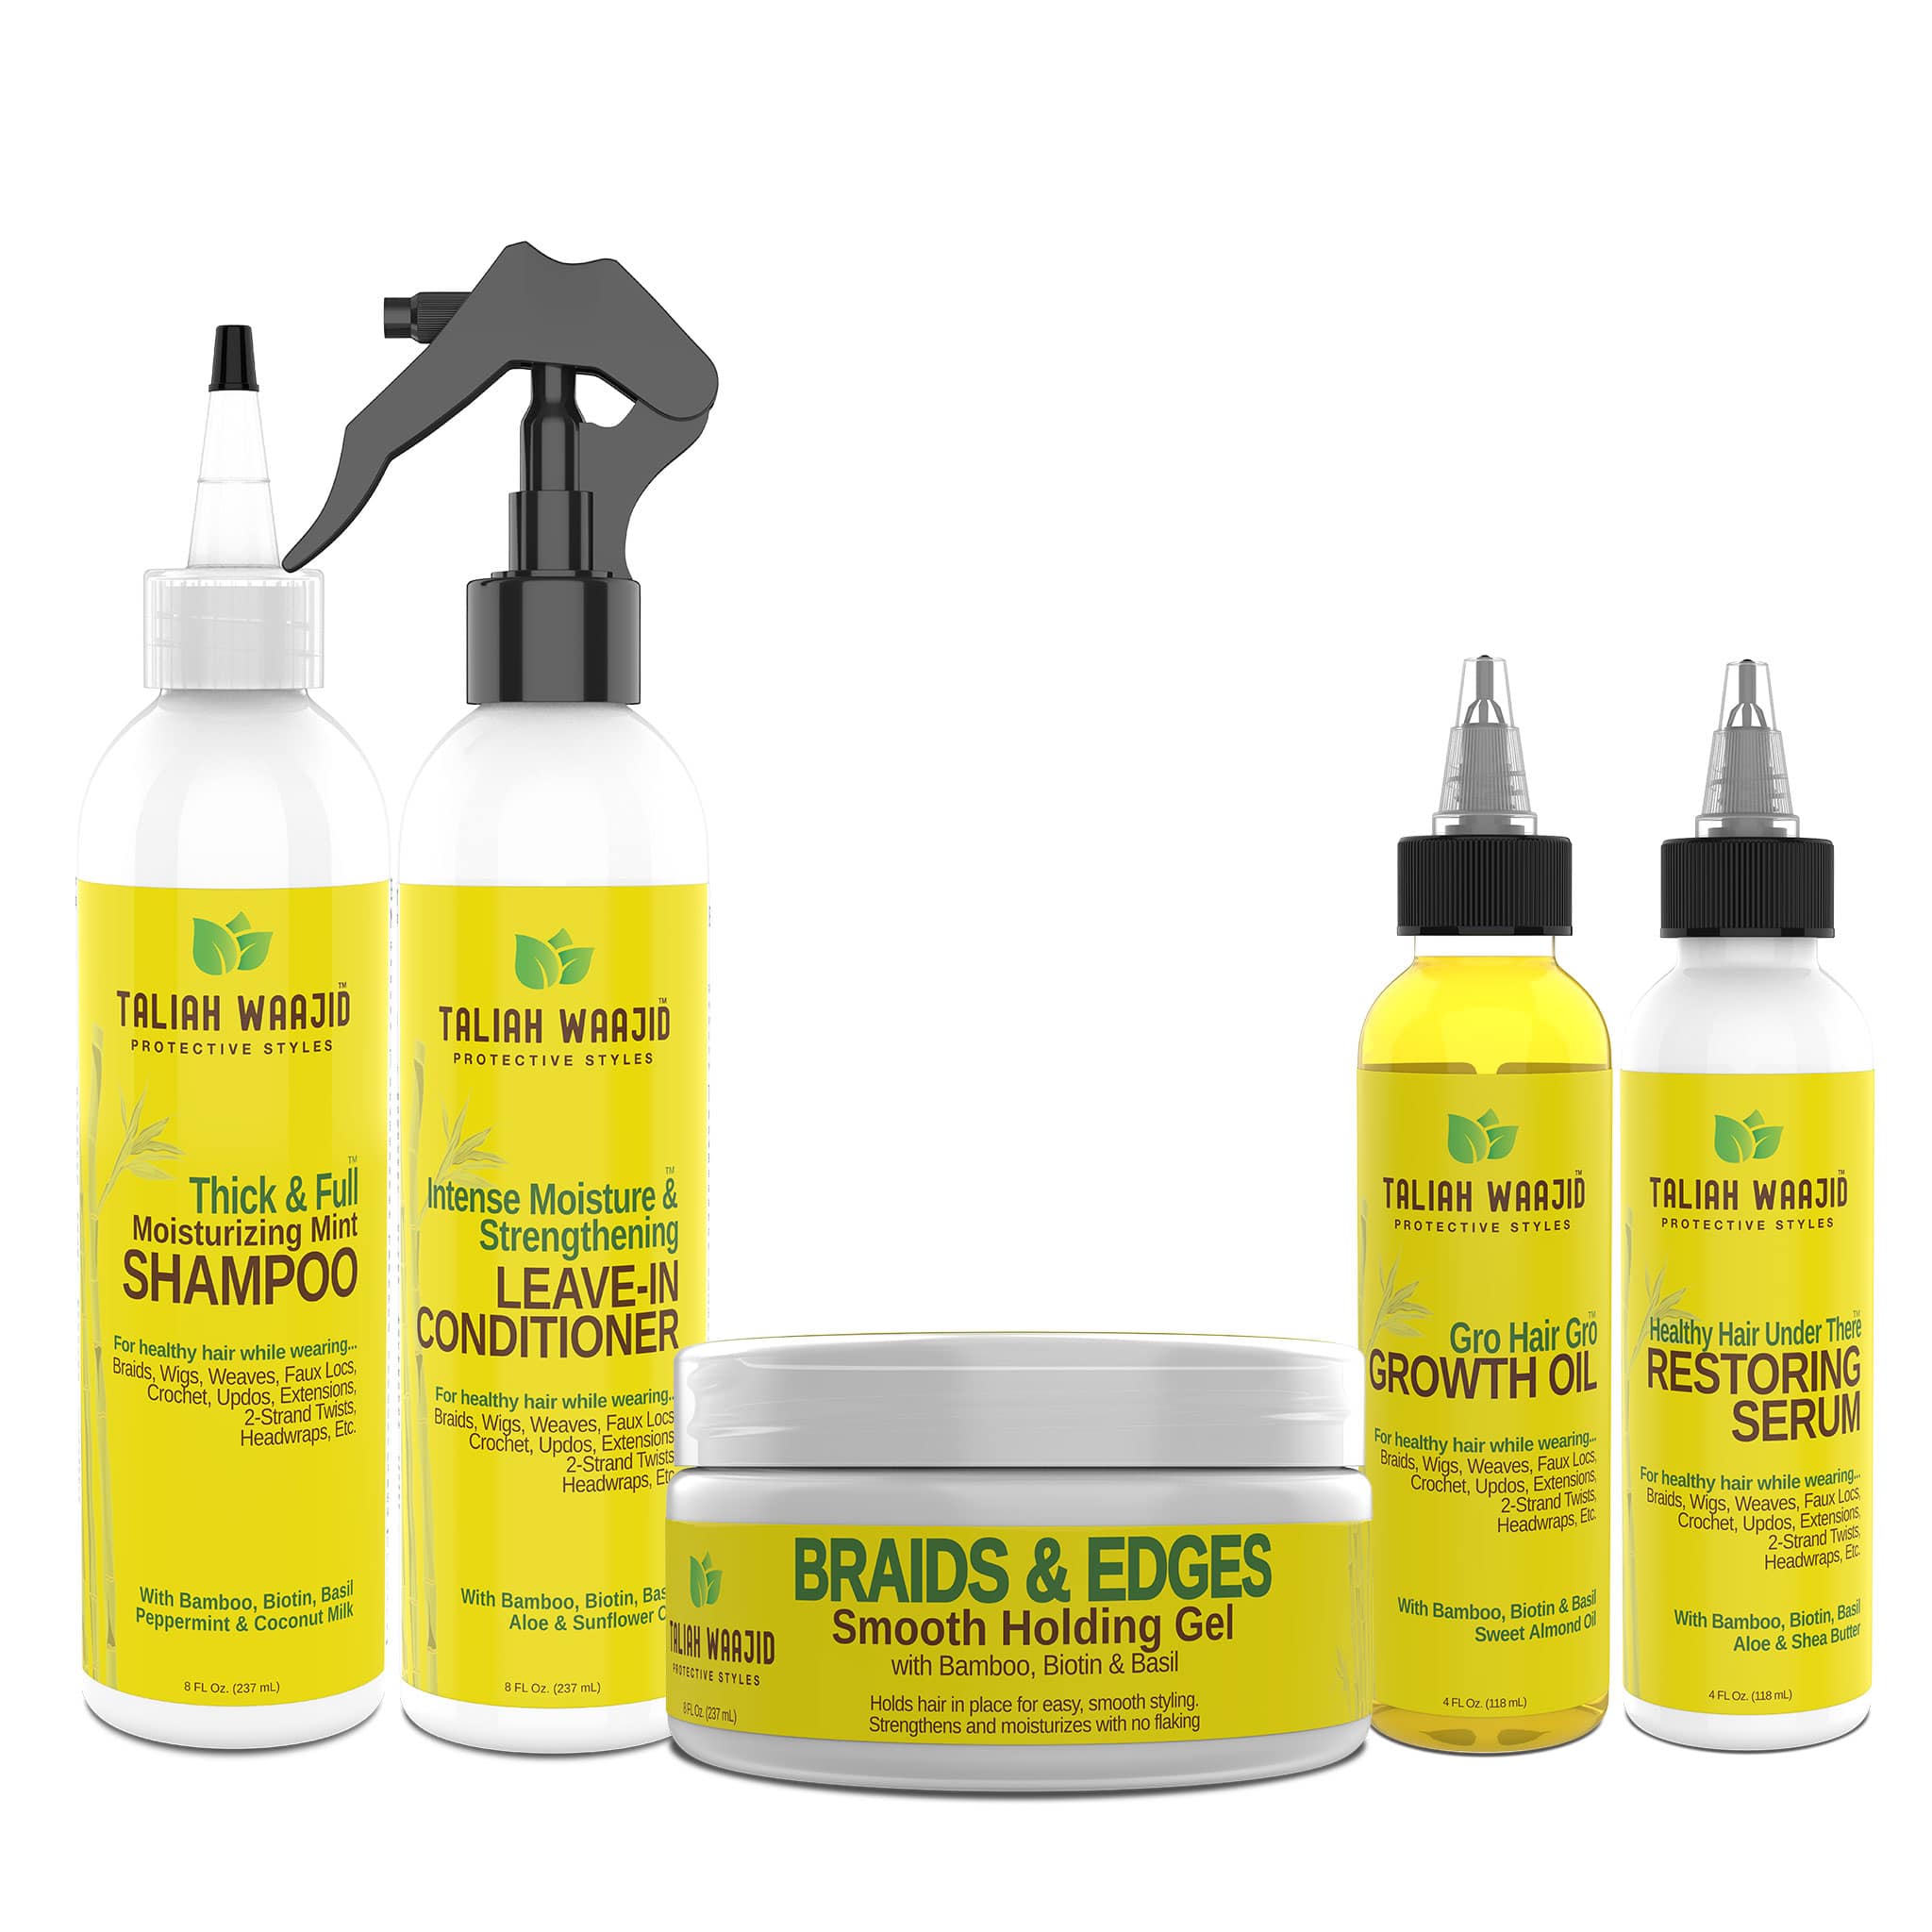 Taliah Waajid Protective Styles Regimen Care for Natural Hair Care Kit